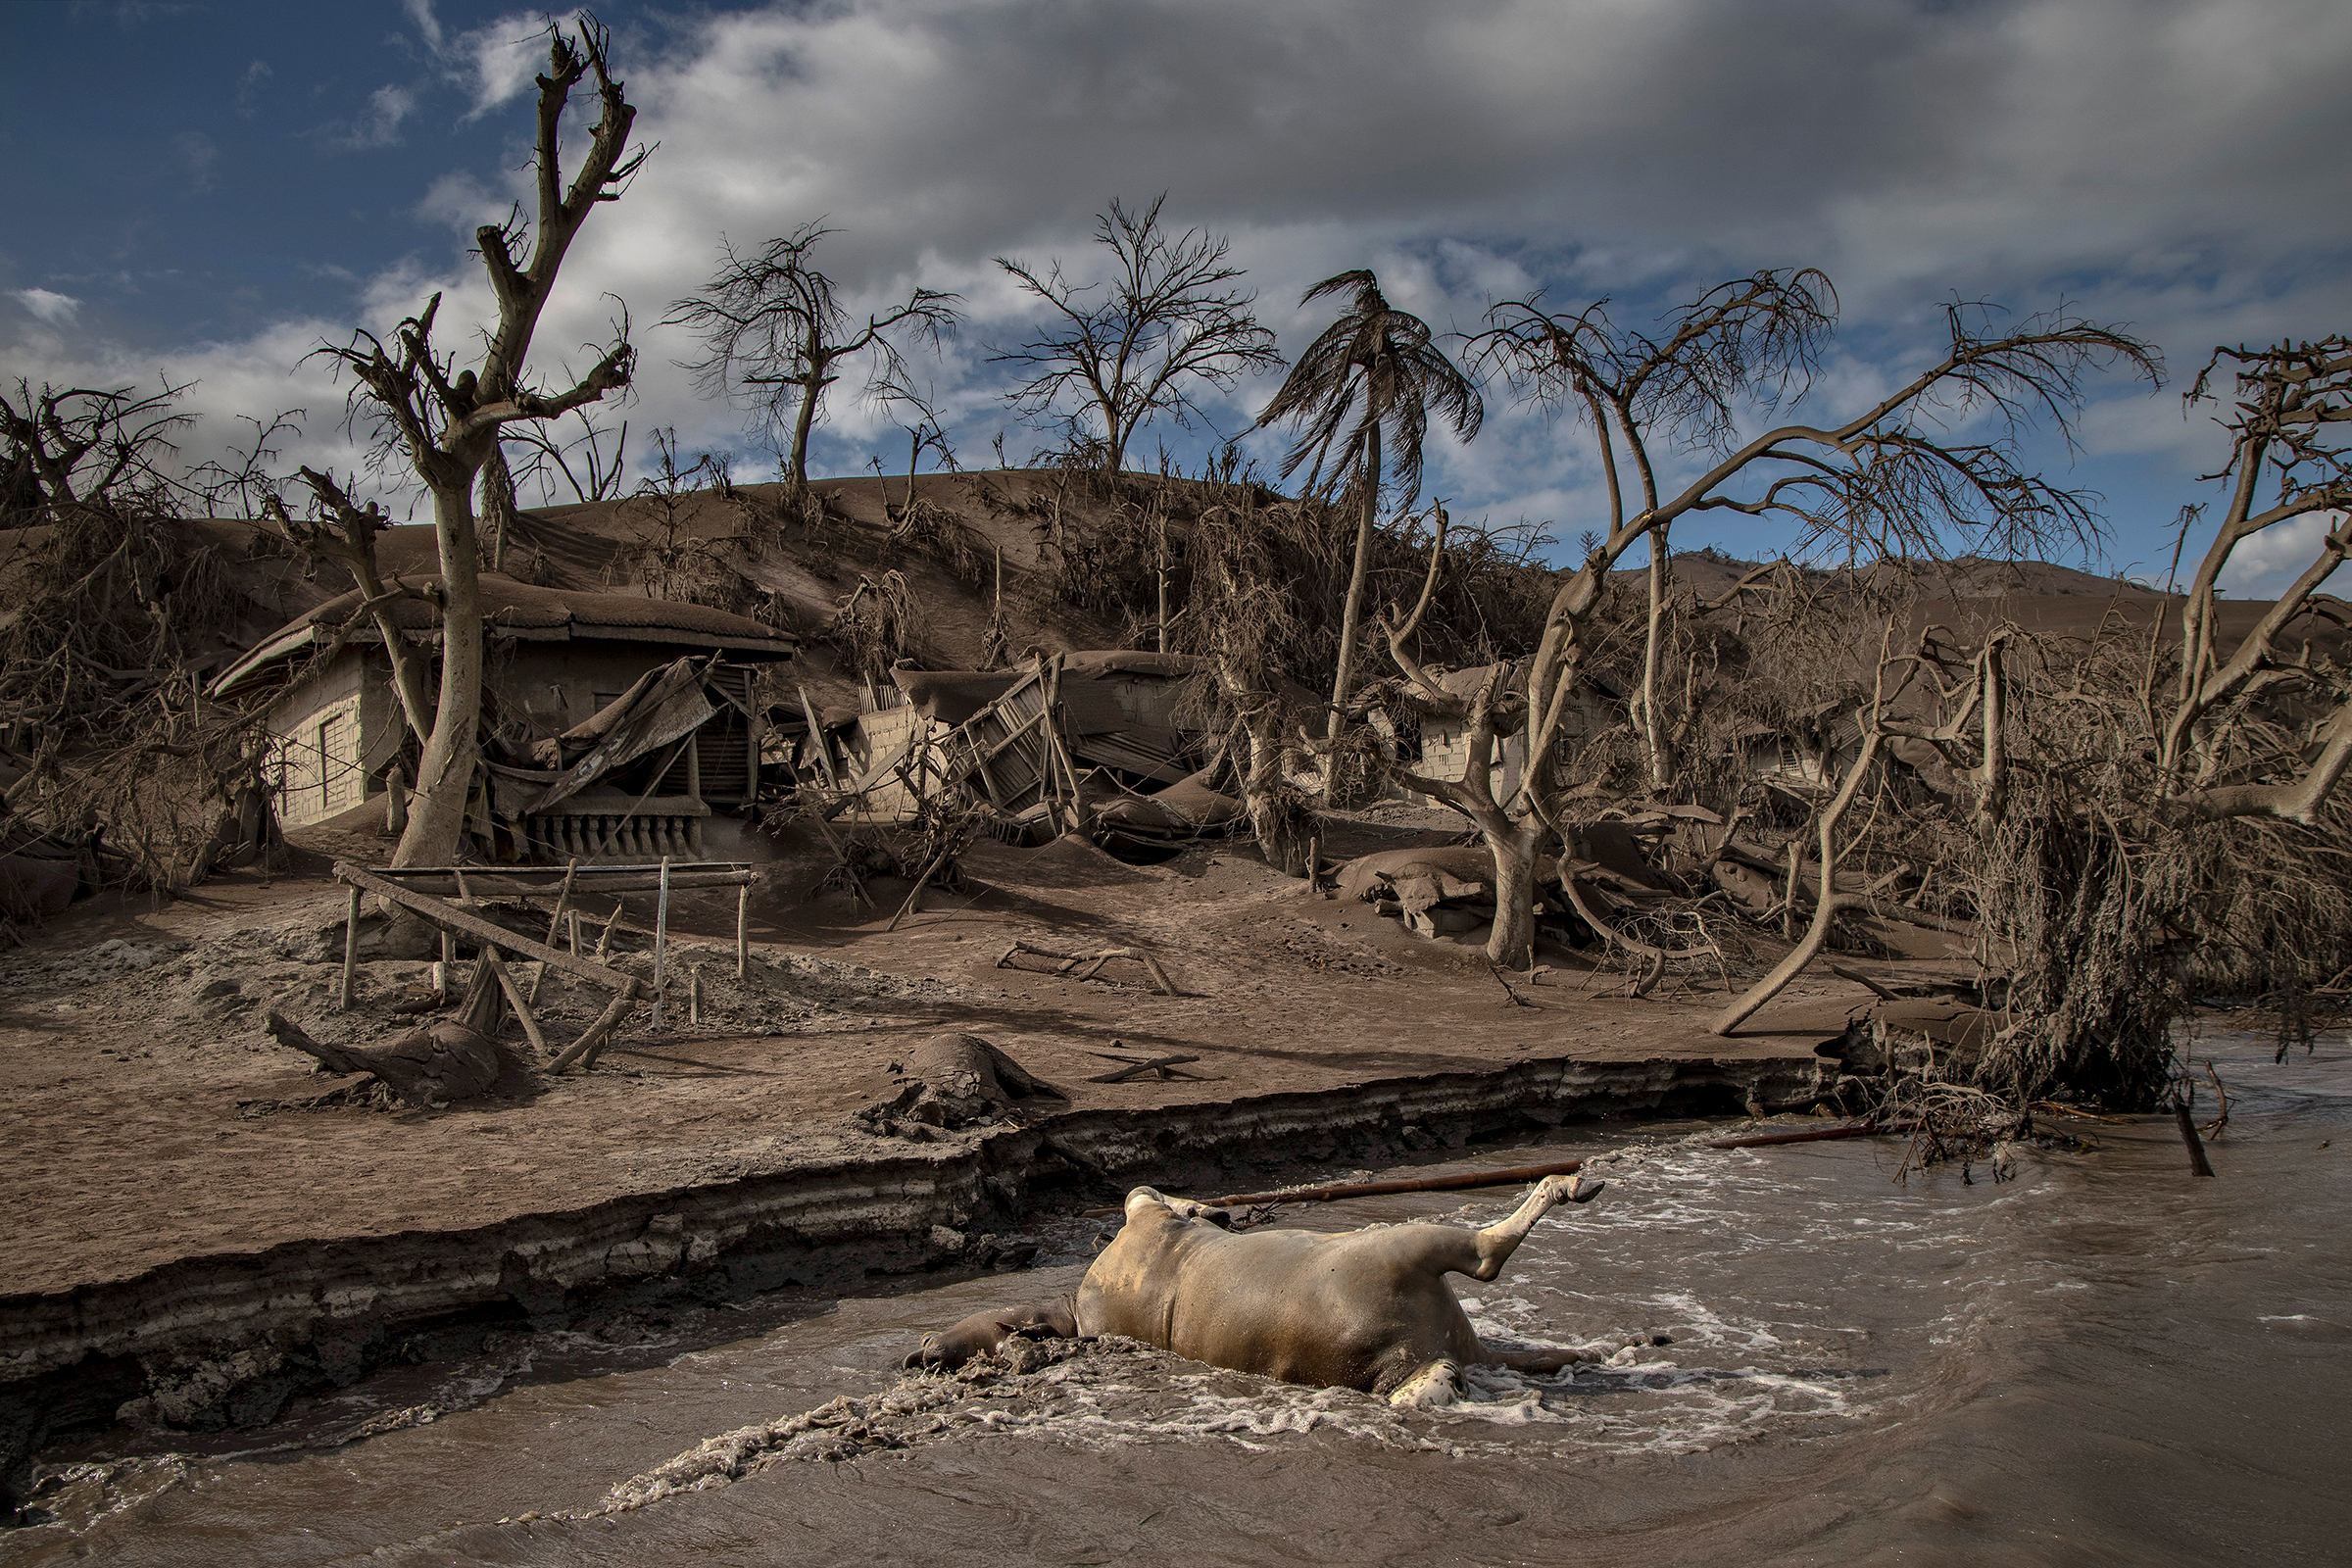 A dead cow rests on the shore. Nearby remains of animals, trees and houses are buried in ash on the island. (Ezra Acayan—Getty Images)